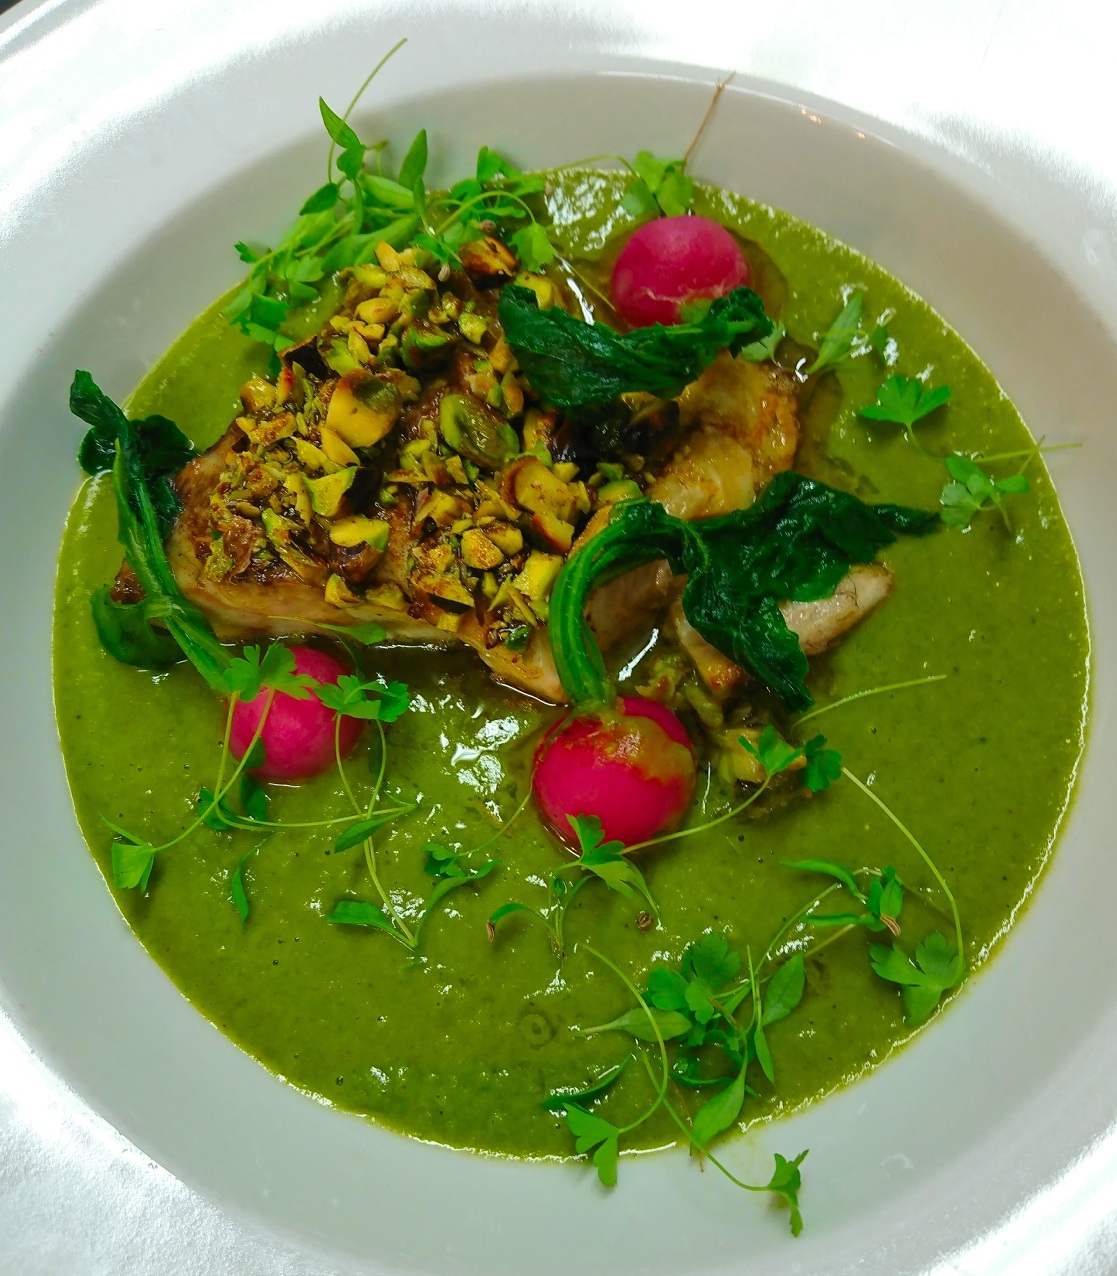 Pan seared hake fillet, parsley & wild rocket vichyssoise, garnished with blanched radish